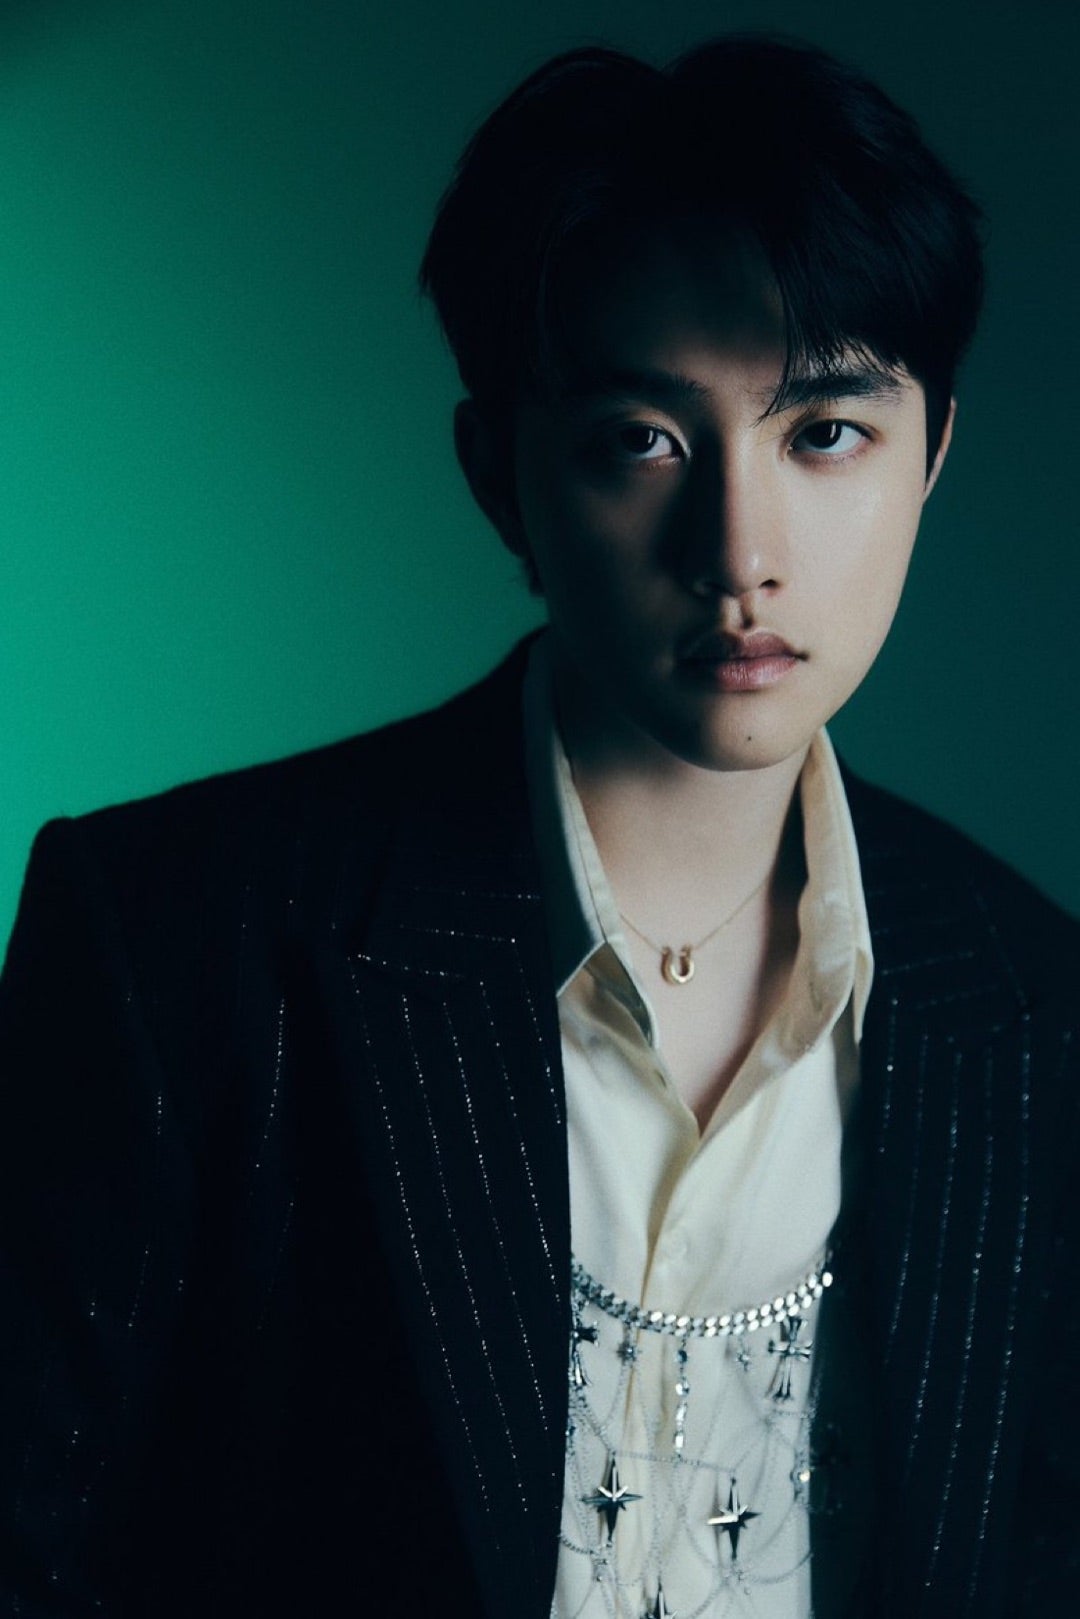 D-1 TO EXIST 'Cream Soda' M/V Teaserのギョンスー♡ | with EXO ...